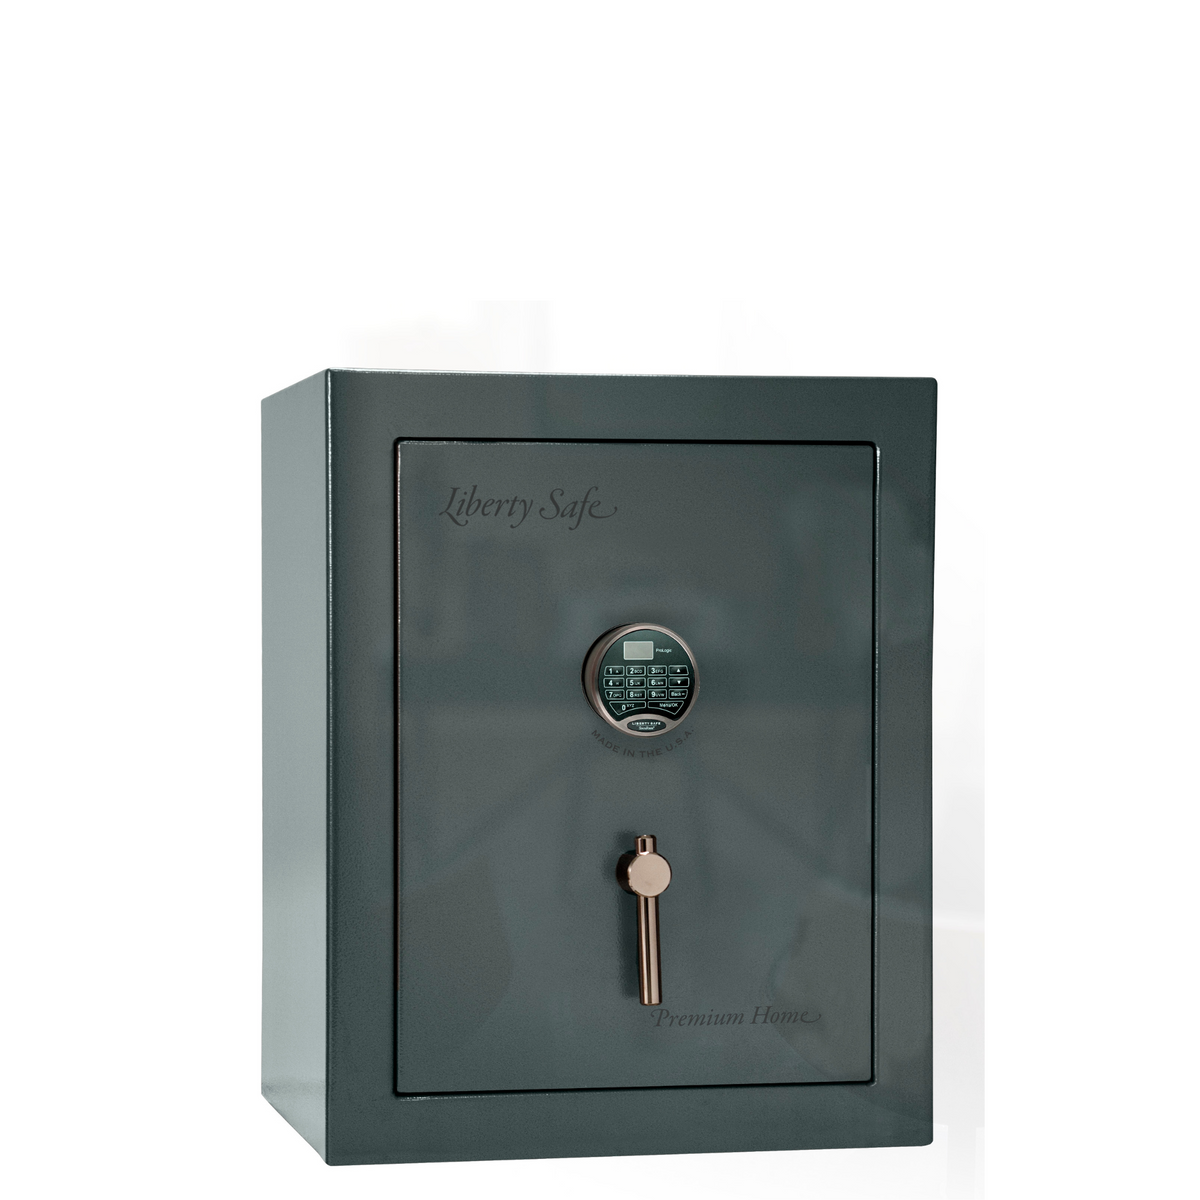 Premium Home Series | Level 7 Security | 2 Hour Fire Protection | 08 | Dimensions: 29.75&quot;(H) x 24.5&quot;(W) x 19&quot;(D) | Forest Mist Gloss - Closed Door